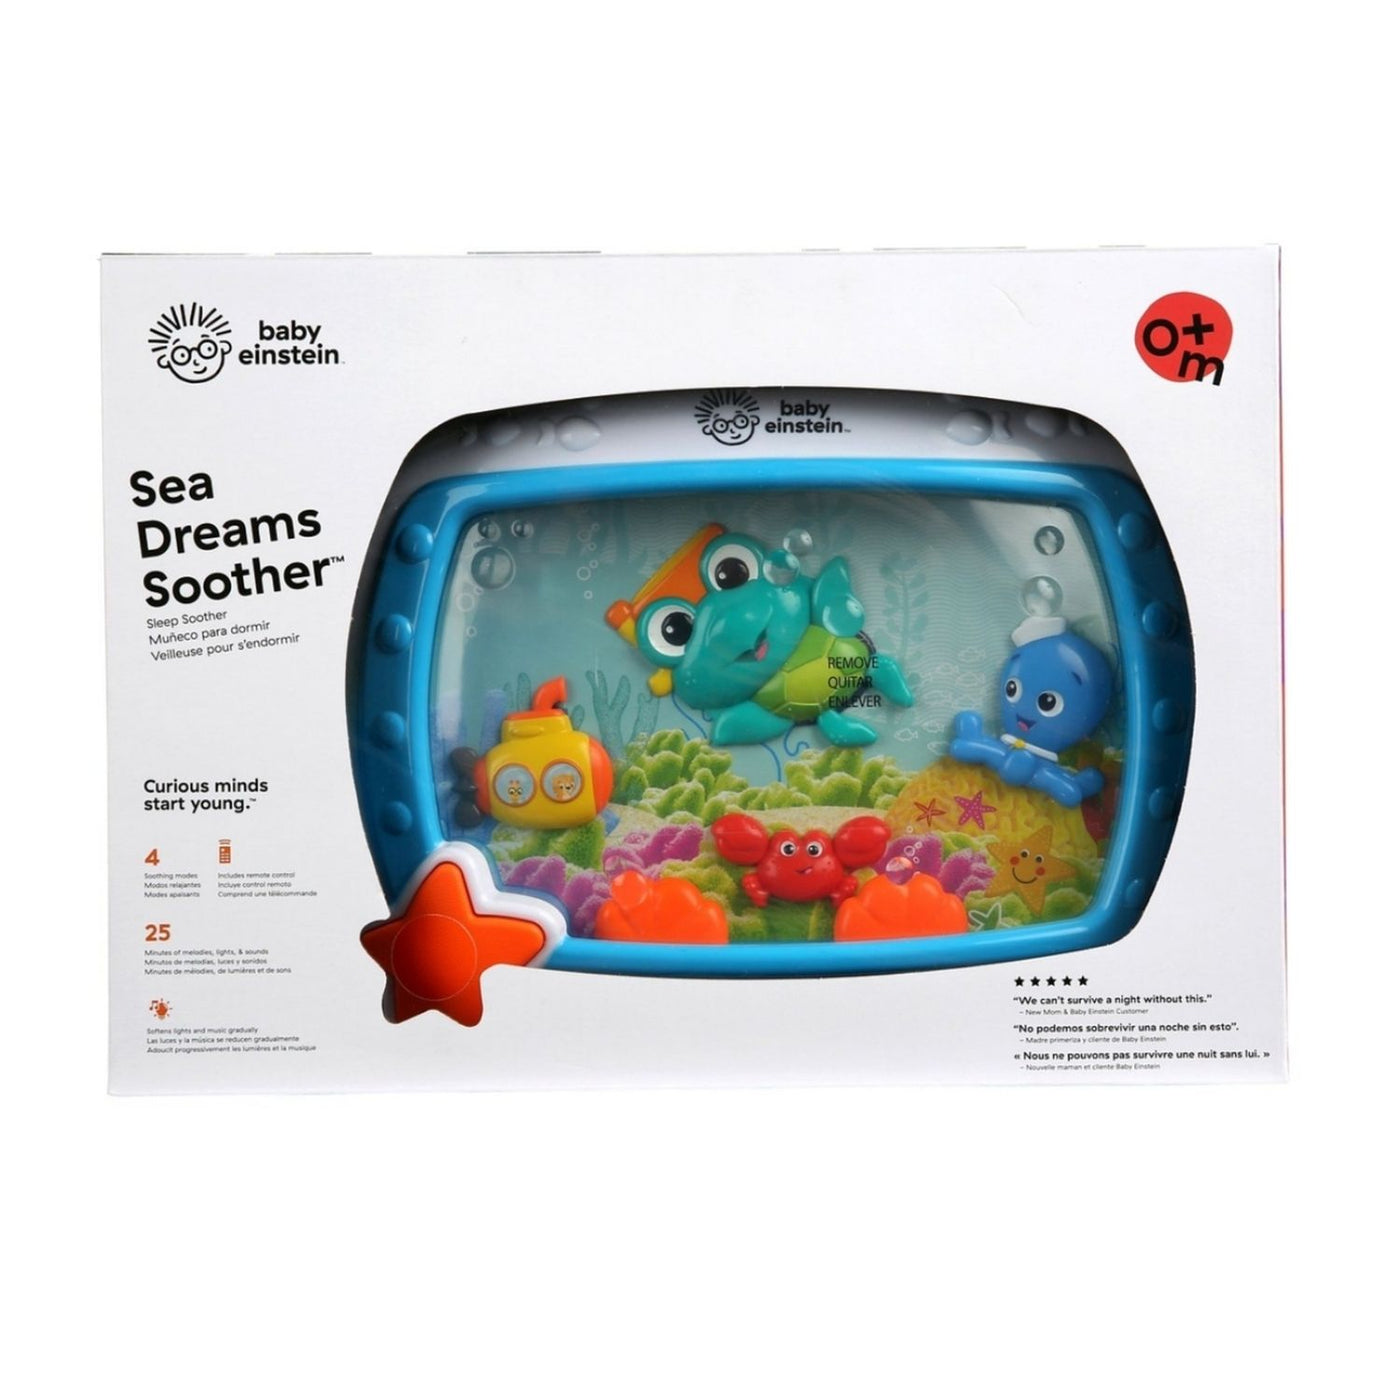 Baby Einstein Sea Dreams Bedtime Soother Crib Lullaby White Noise Machine